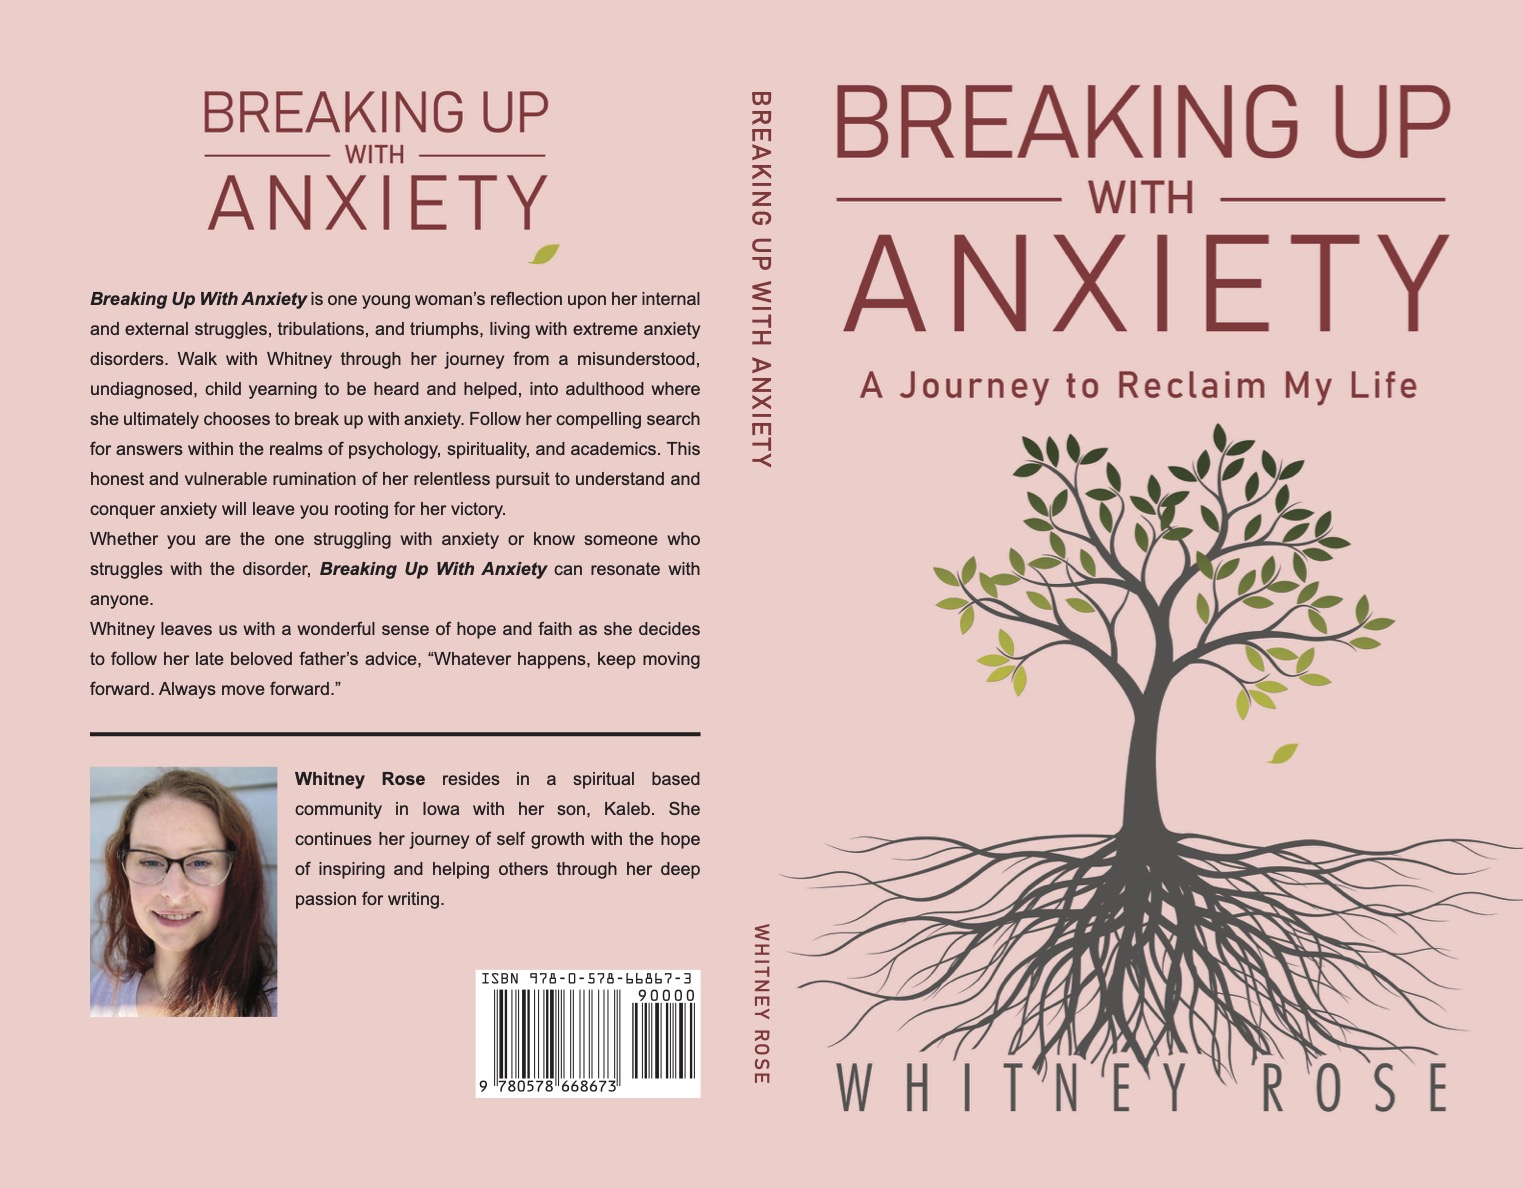 "Breaking Up with Anxiety" - A Journey to Reclaim My Life